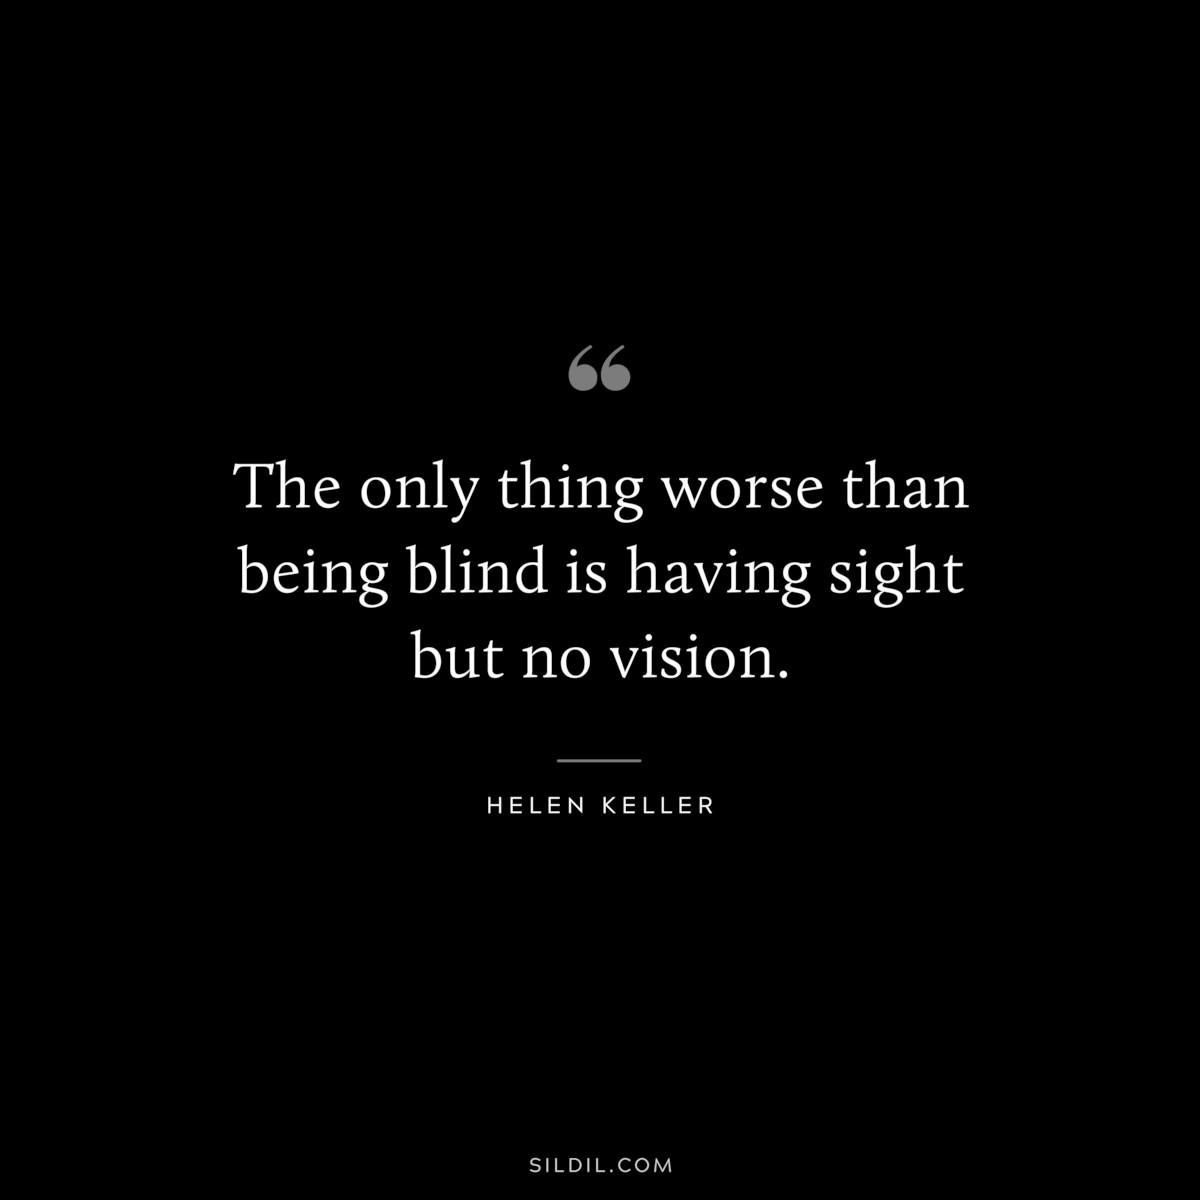 The only thing worse than being blind is having sight but no vision. ― Helen Keller